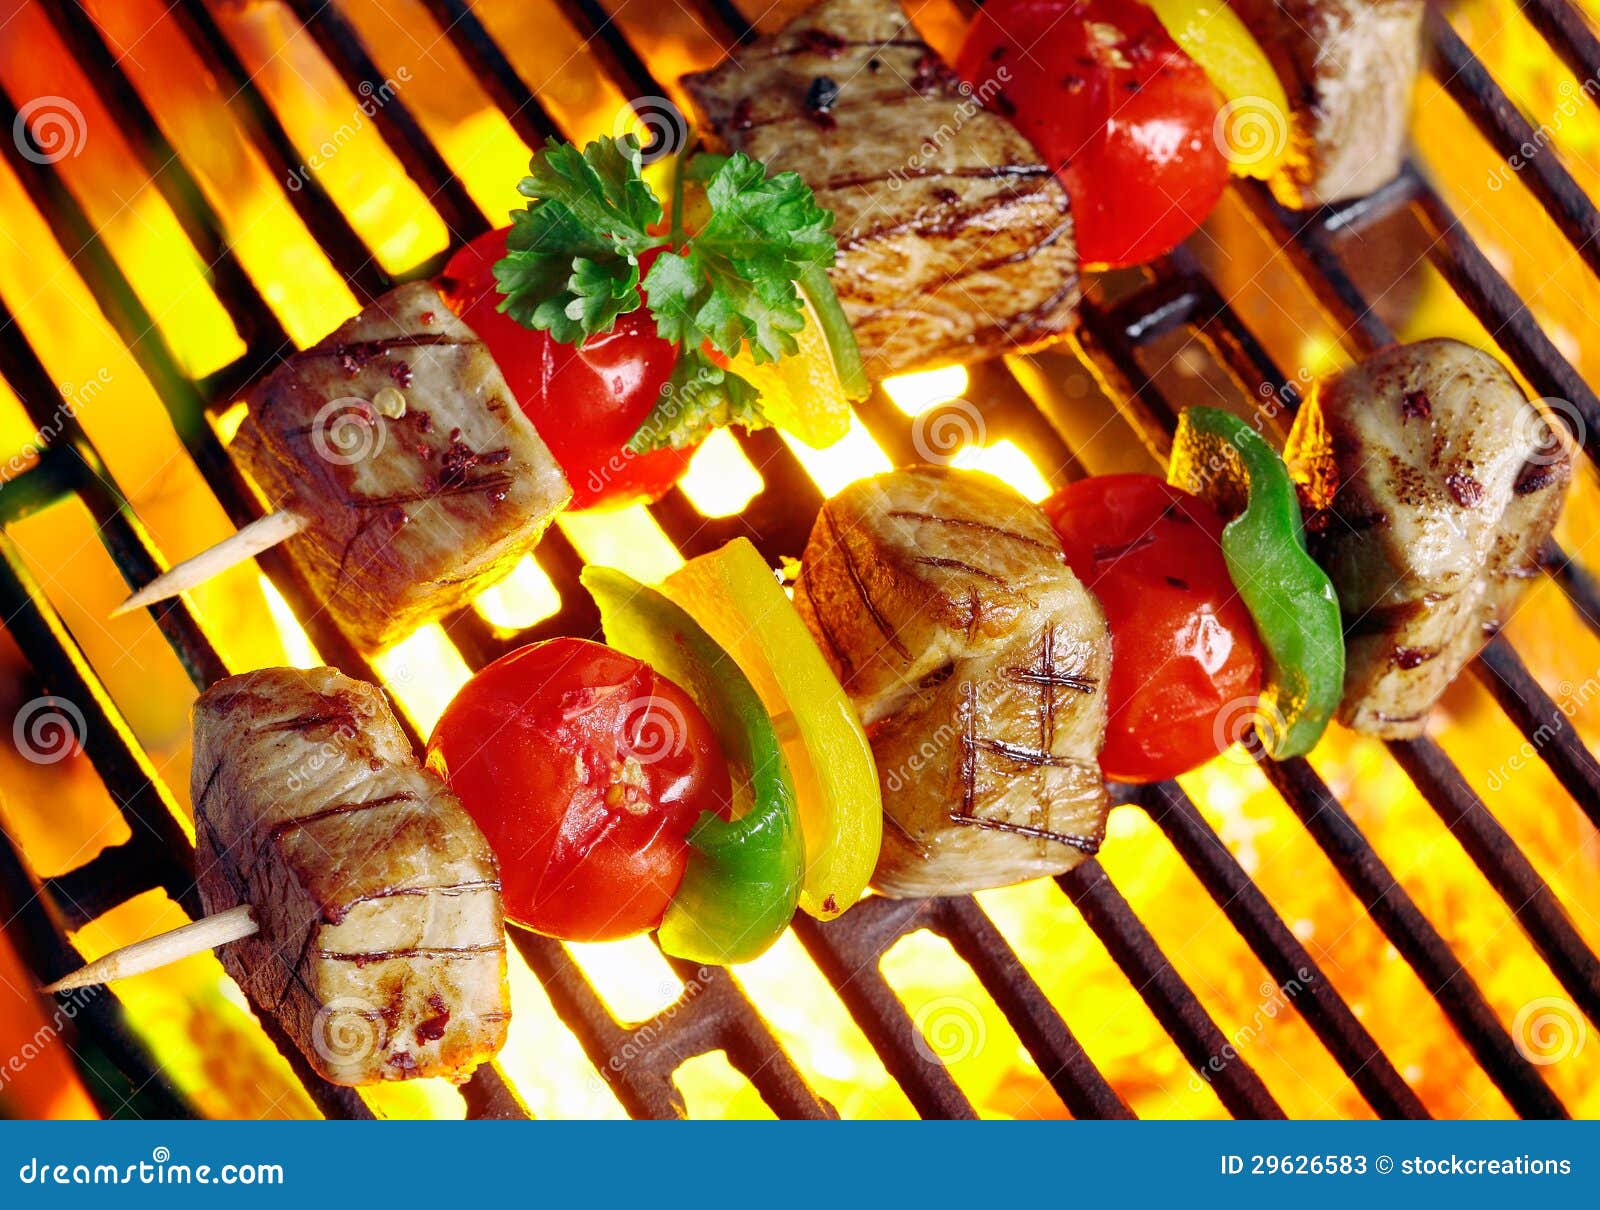 meat kebabs sizzling over the coals